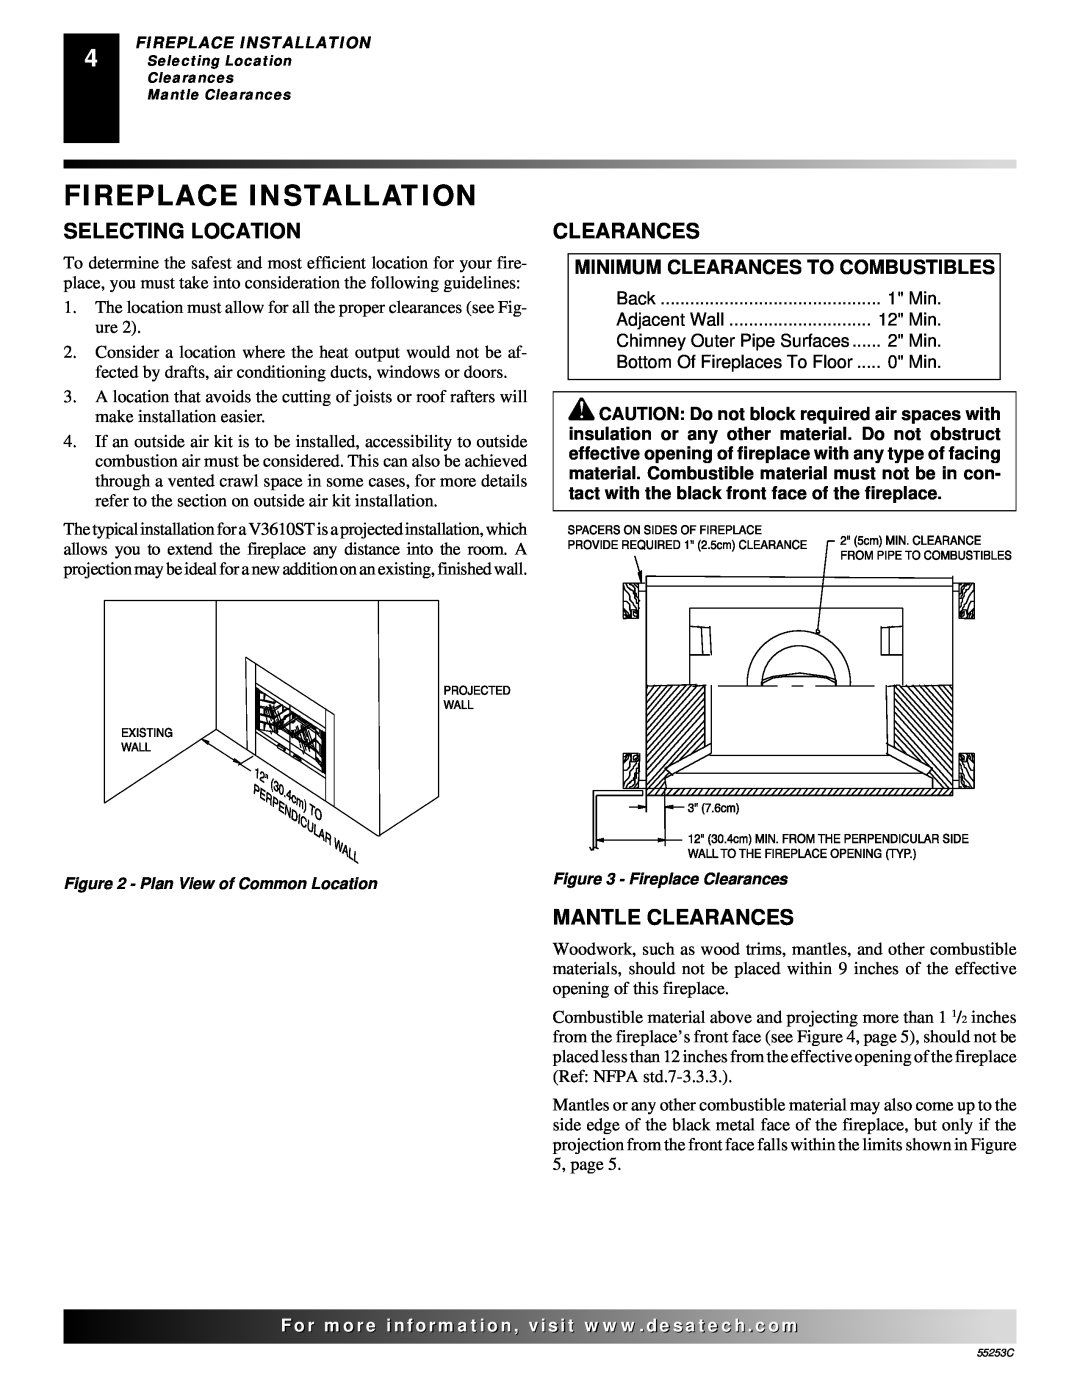 Desa V3610ST manual Fireplace Installation, Selecting Location, Mantle Clearances 